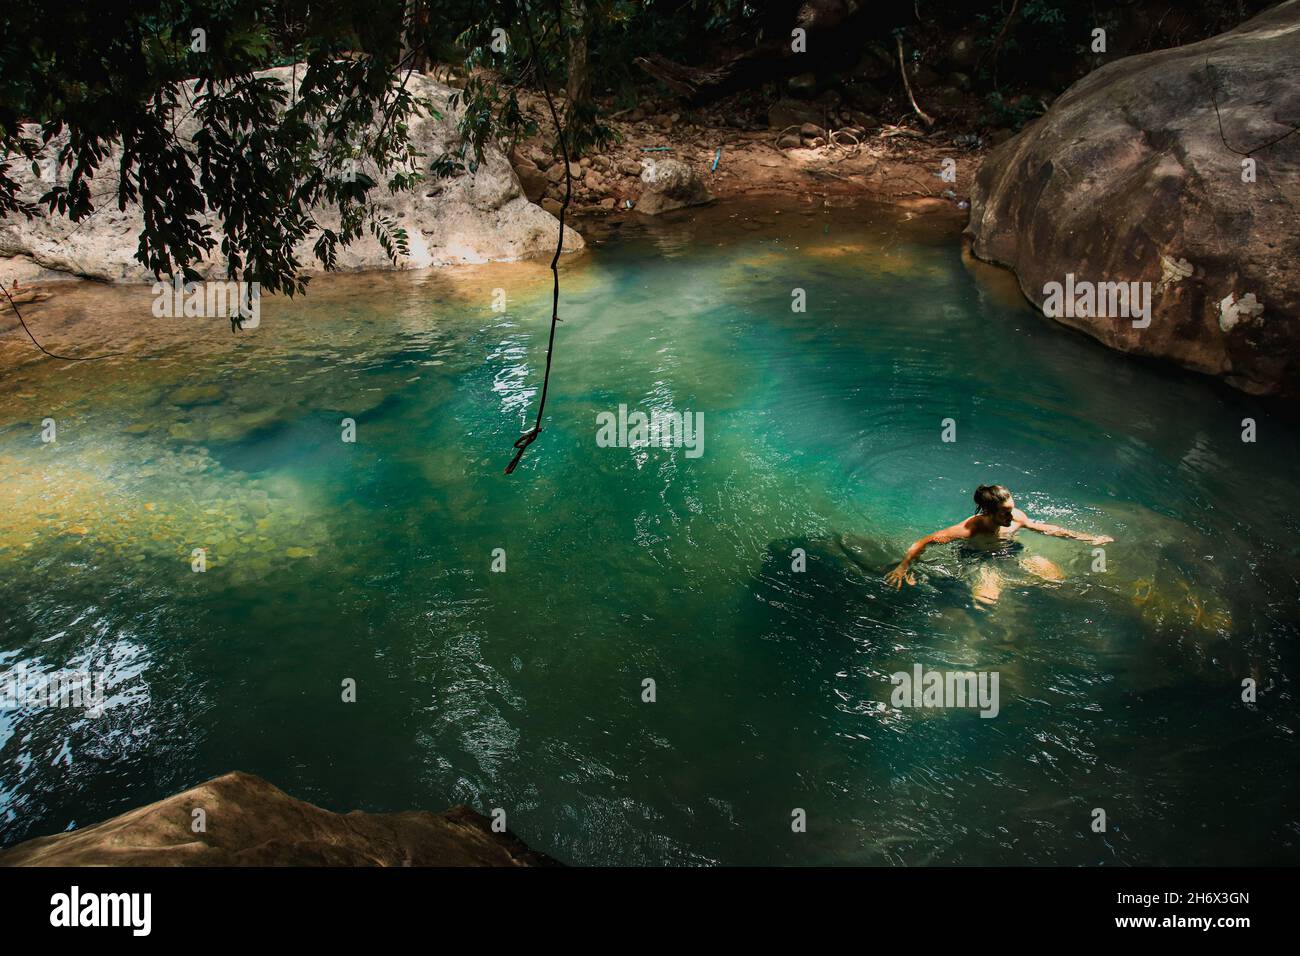 High angle view of a man swimming in a natural pond in the middle of the forest Stock Photo